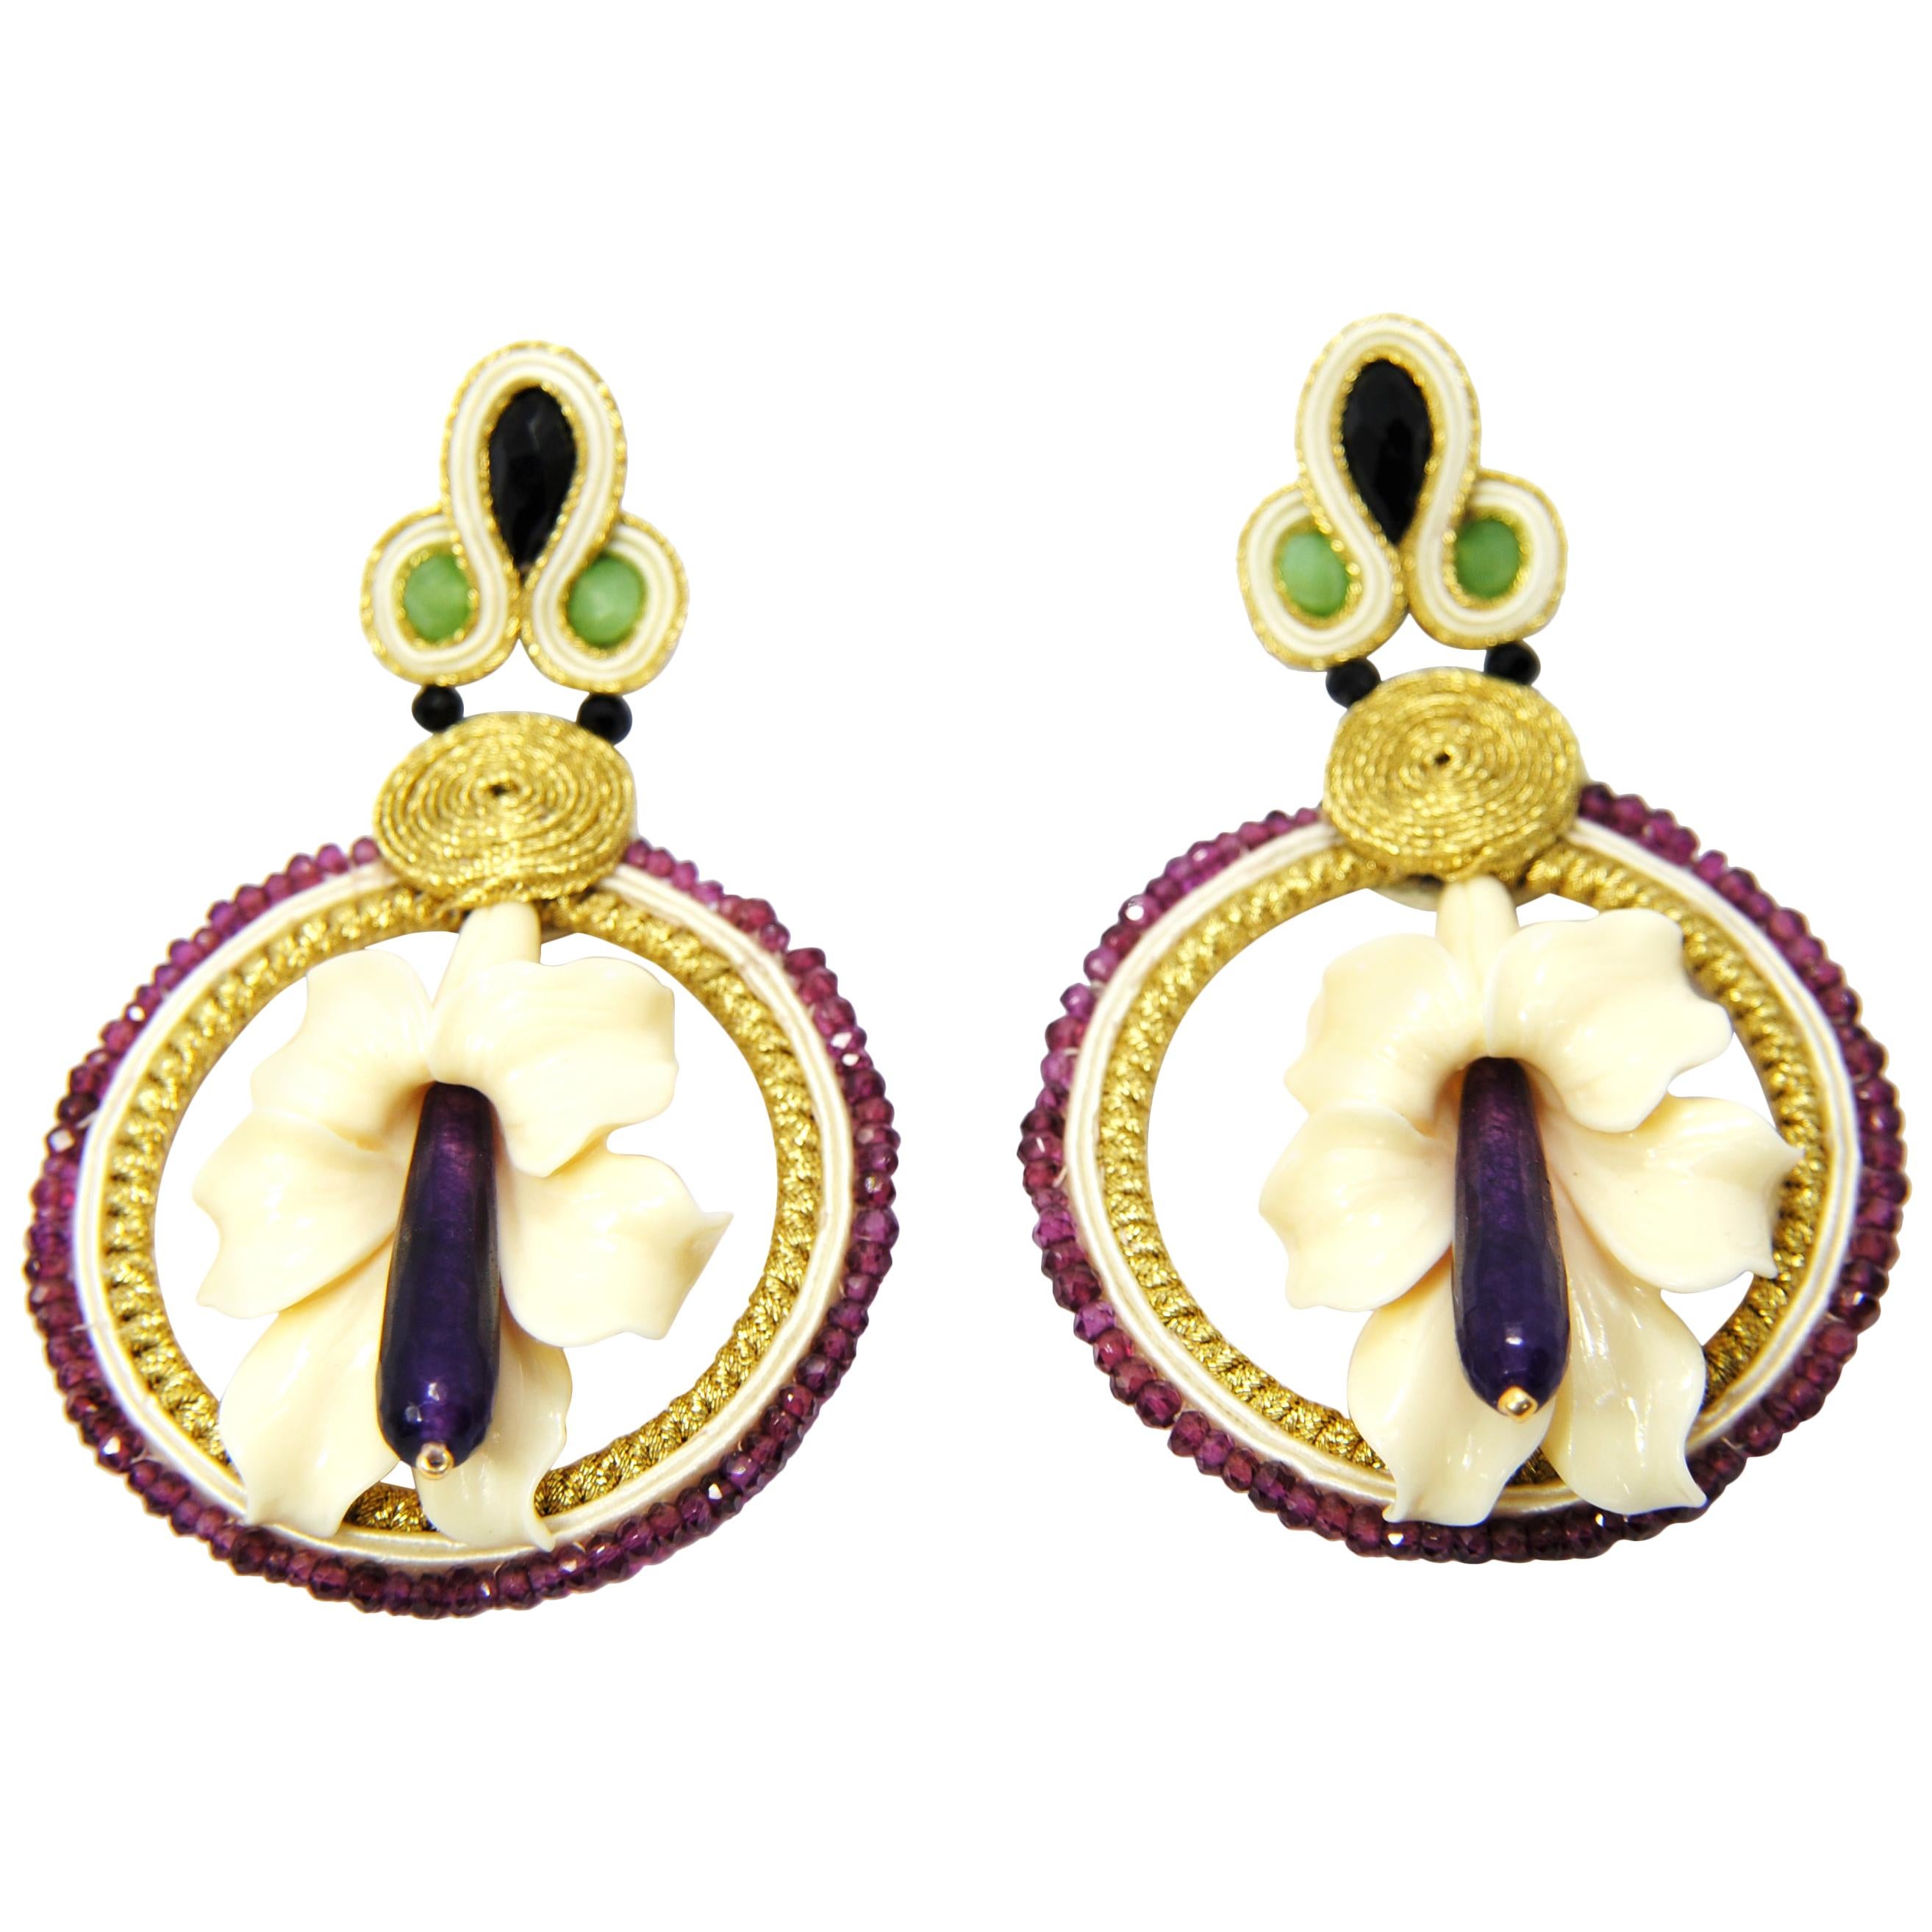 Pradera Kalas Collection Soutache Silver Earrings with Amathysts and Purple Jade For Sale